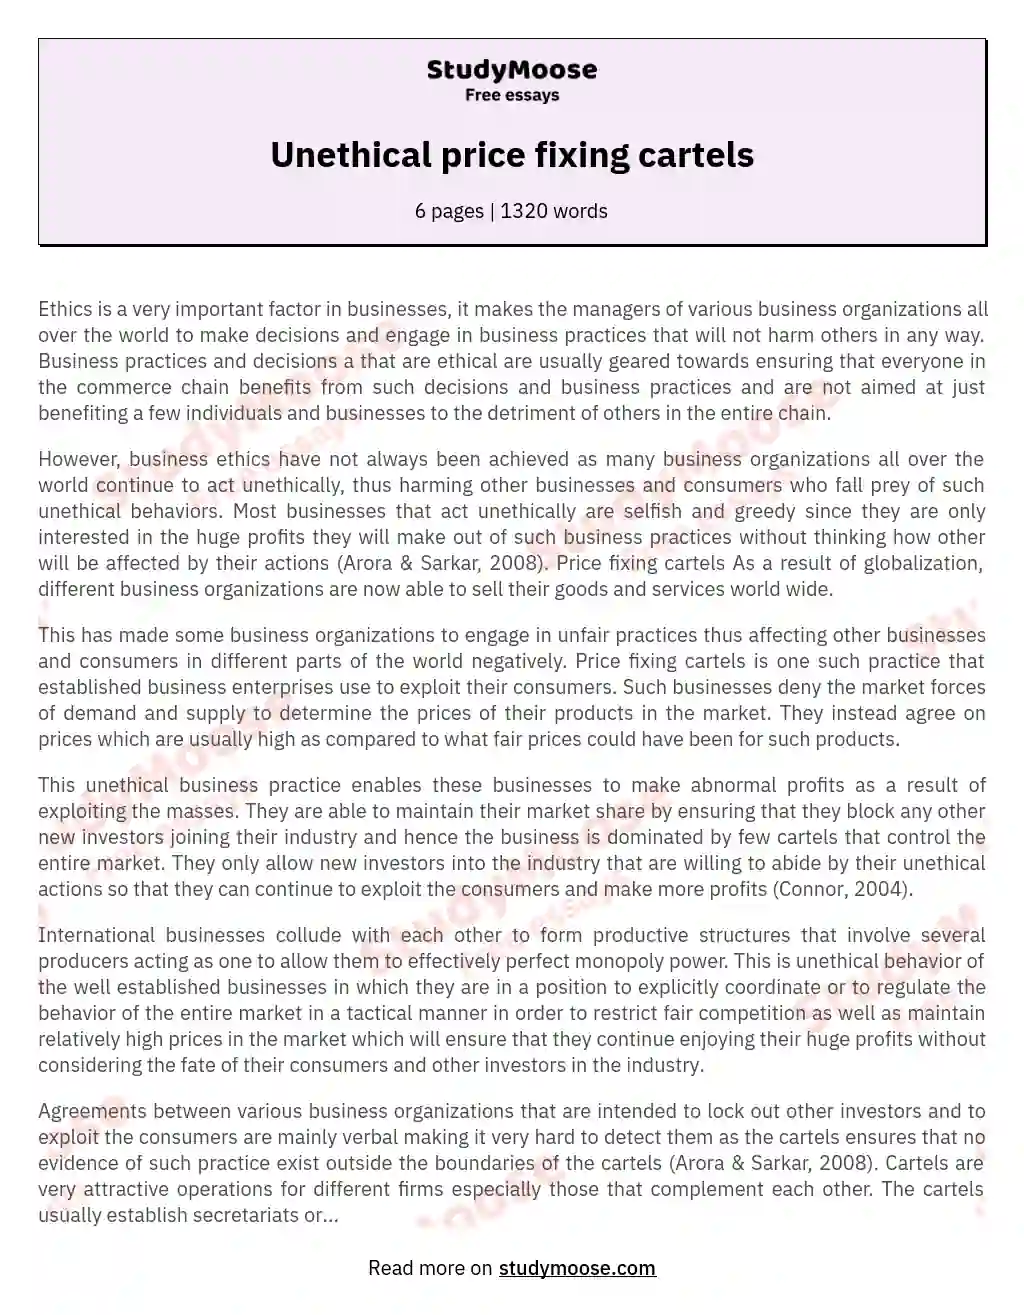 Unethical price fixing cartels essay